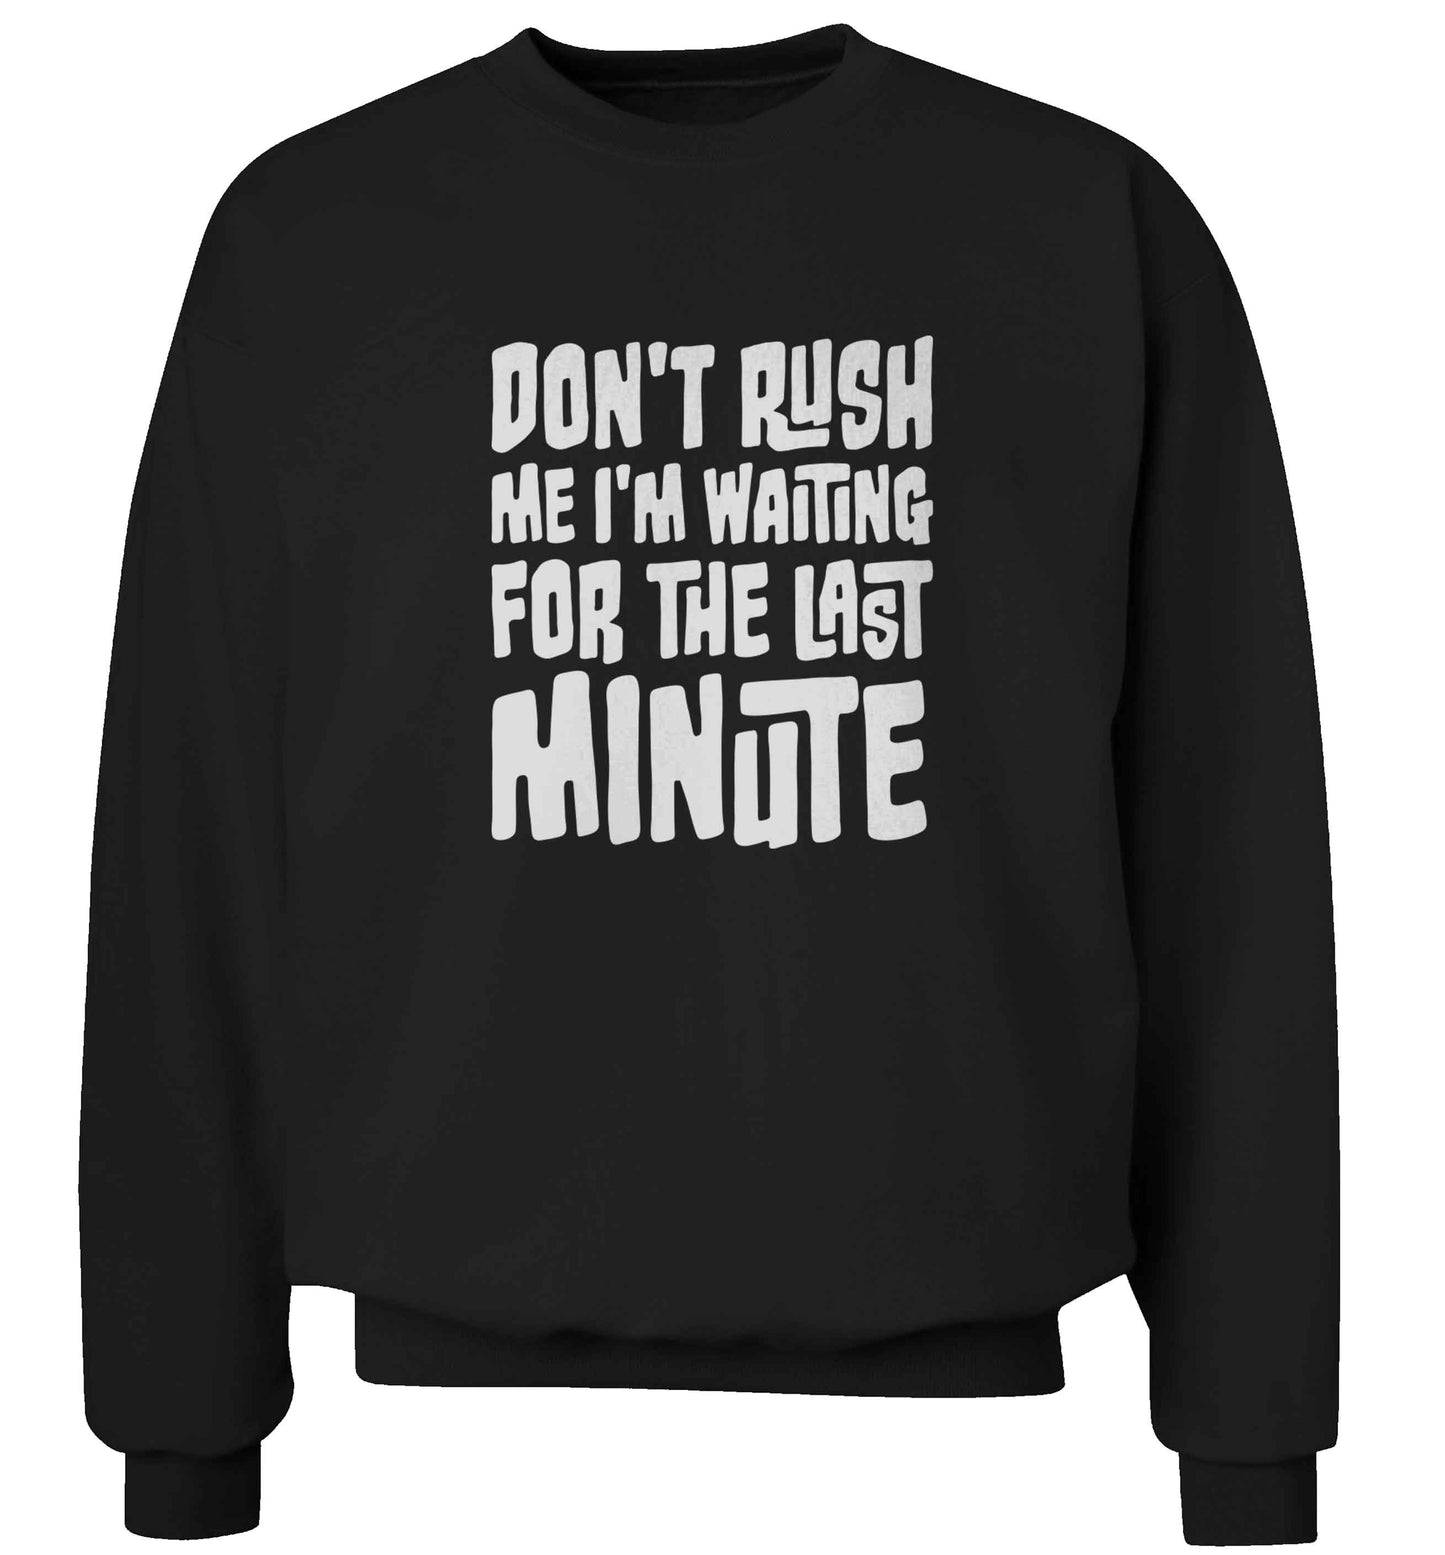 Don't rush me I'm waiting for the last minute adult's unisex black sweater 2XL